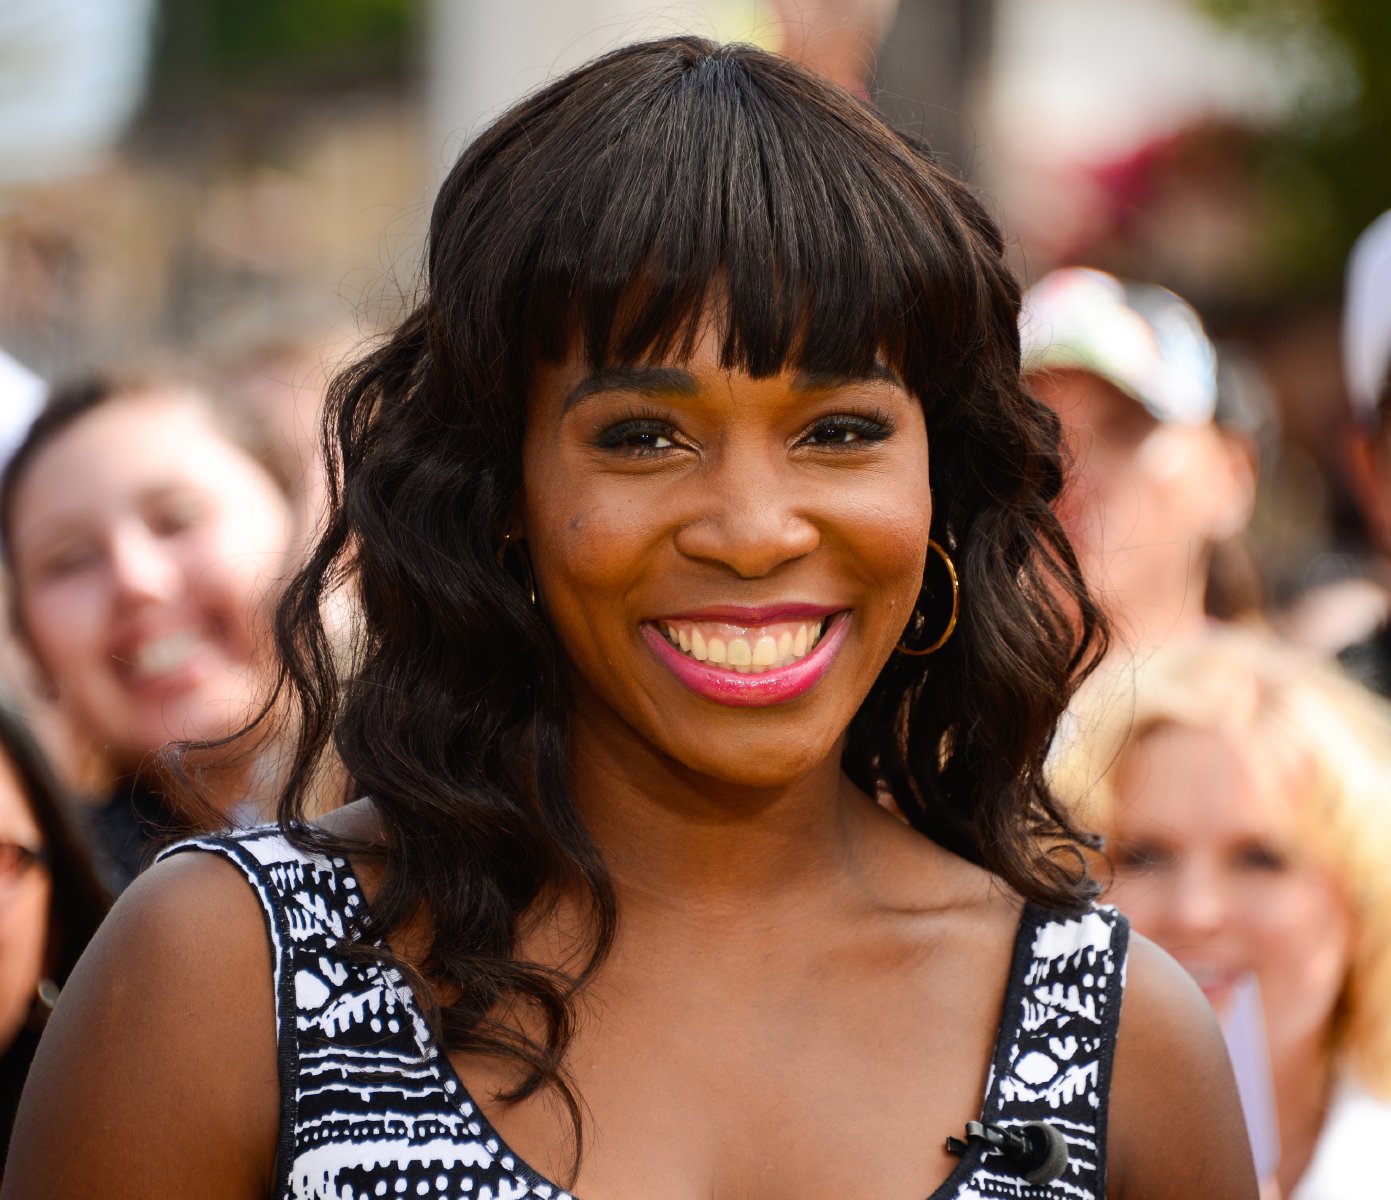 Venus Williams visits "Extra" at Universal Studios Hollywood on April 22, 2014 in Universal City, California | Photo: Getty Images 